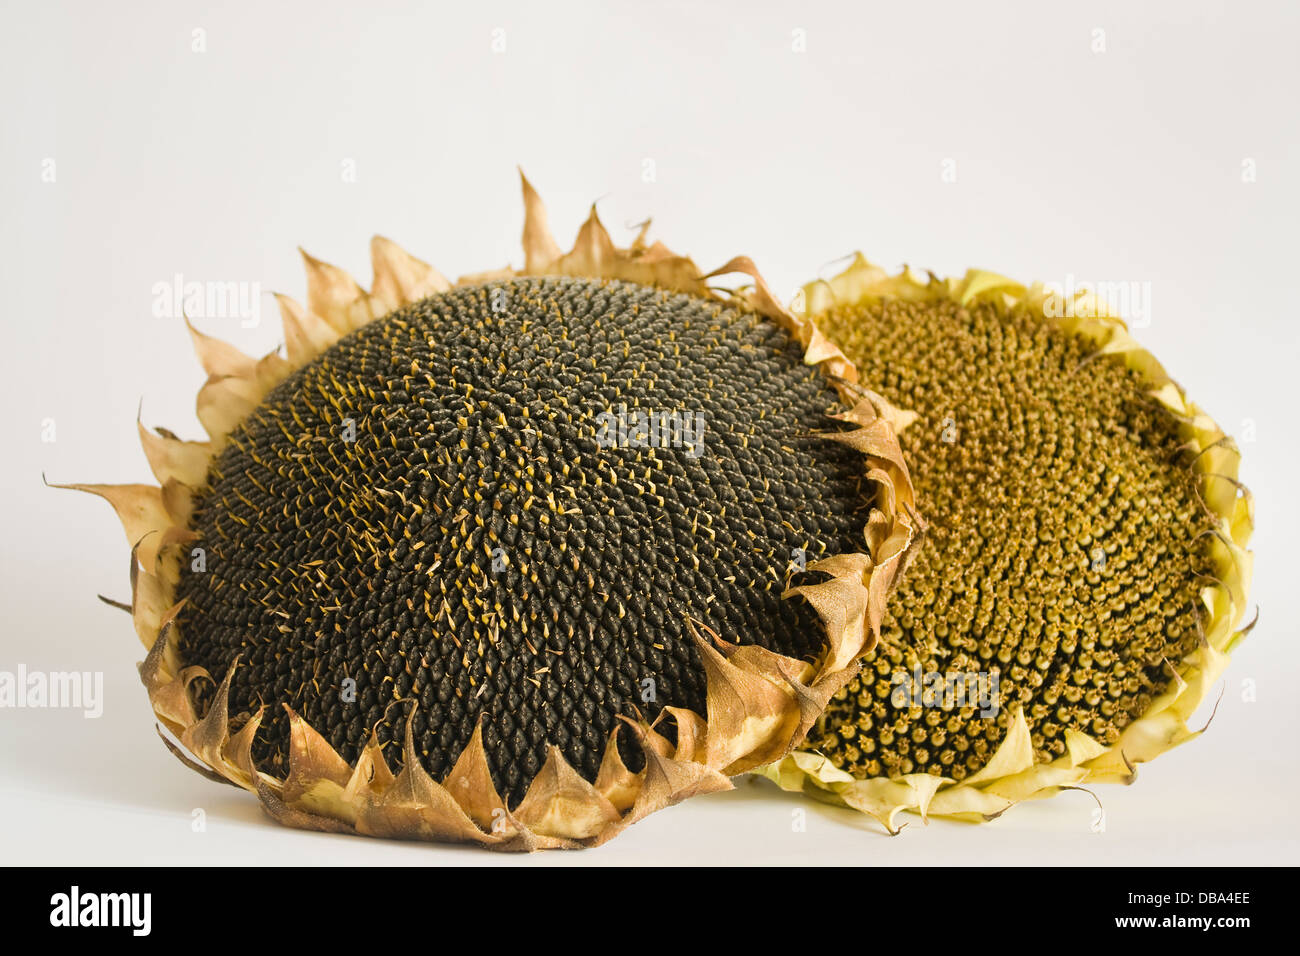 Sunflowers and  inner seeds on white background,Helianthus  Annuus,yellow,cut out,studio,style life,two,close up,natural. Stock Photo